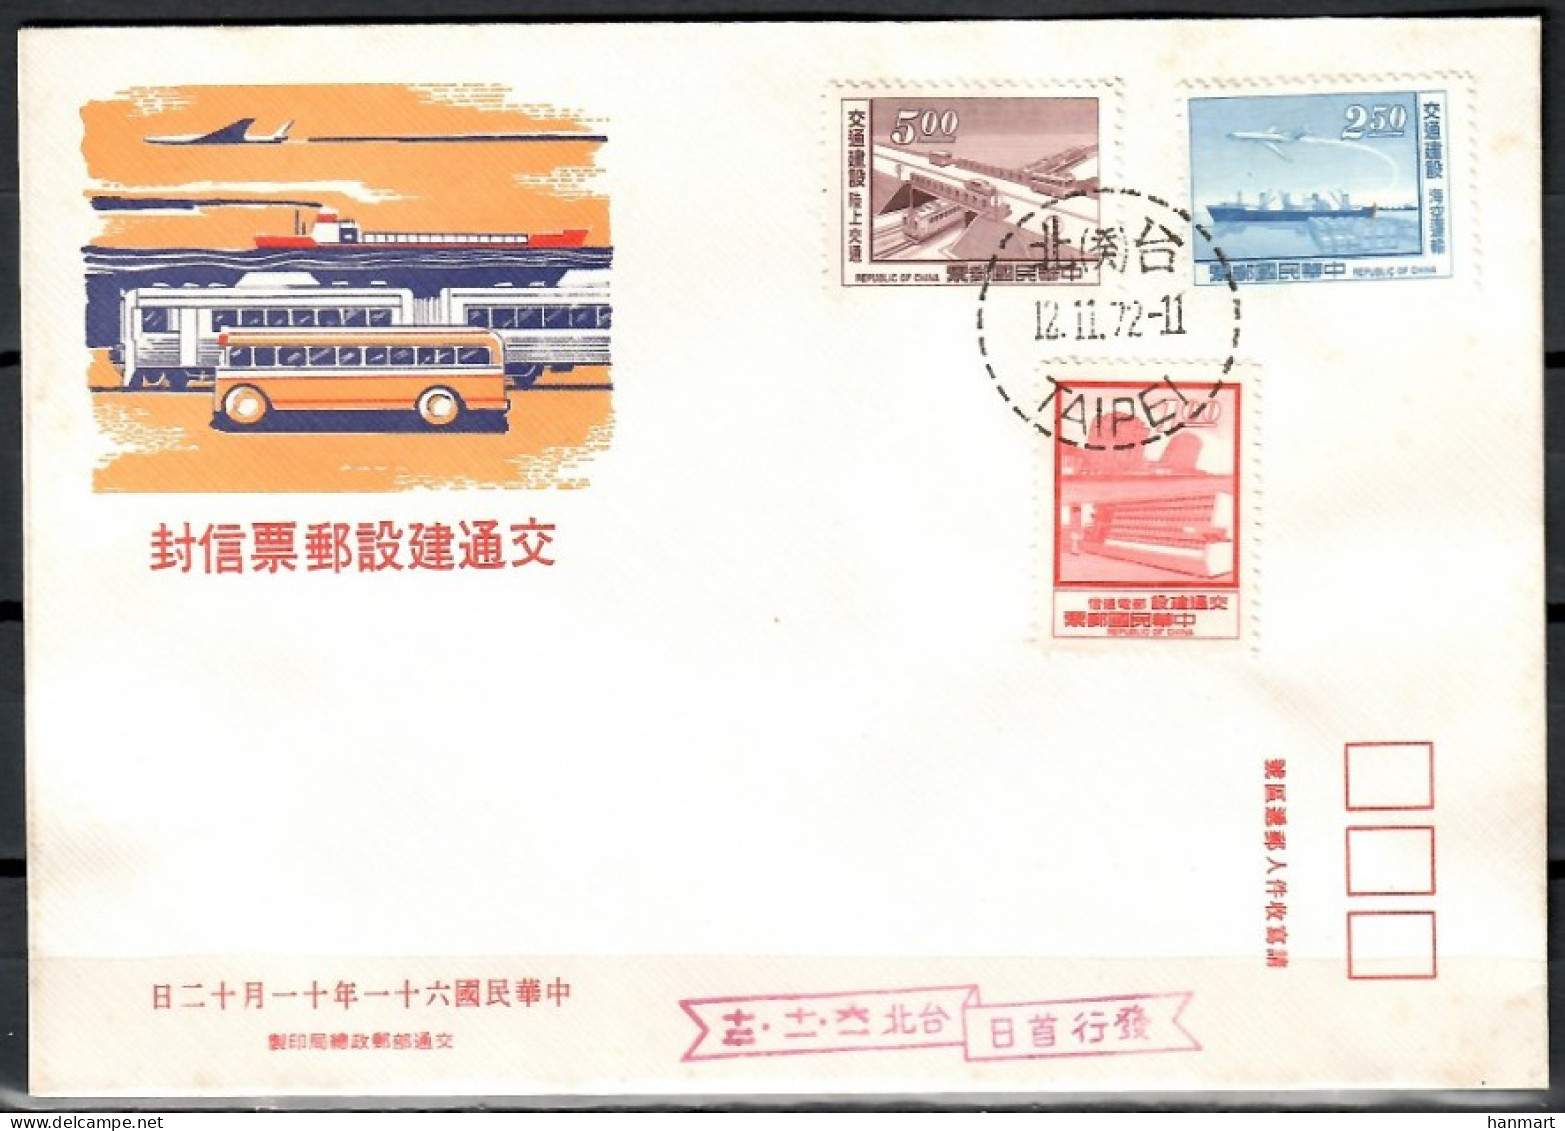 Taiwan (Republic Of China) 1972 Mi 926-928 FDC  (FDC ZS9 FRM926-928) - Coches